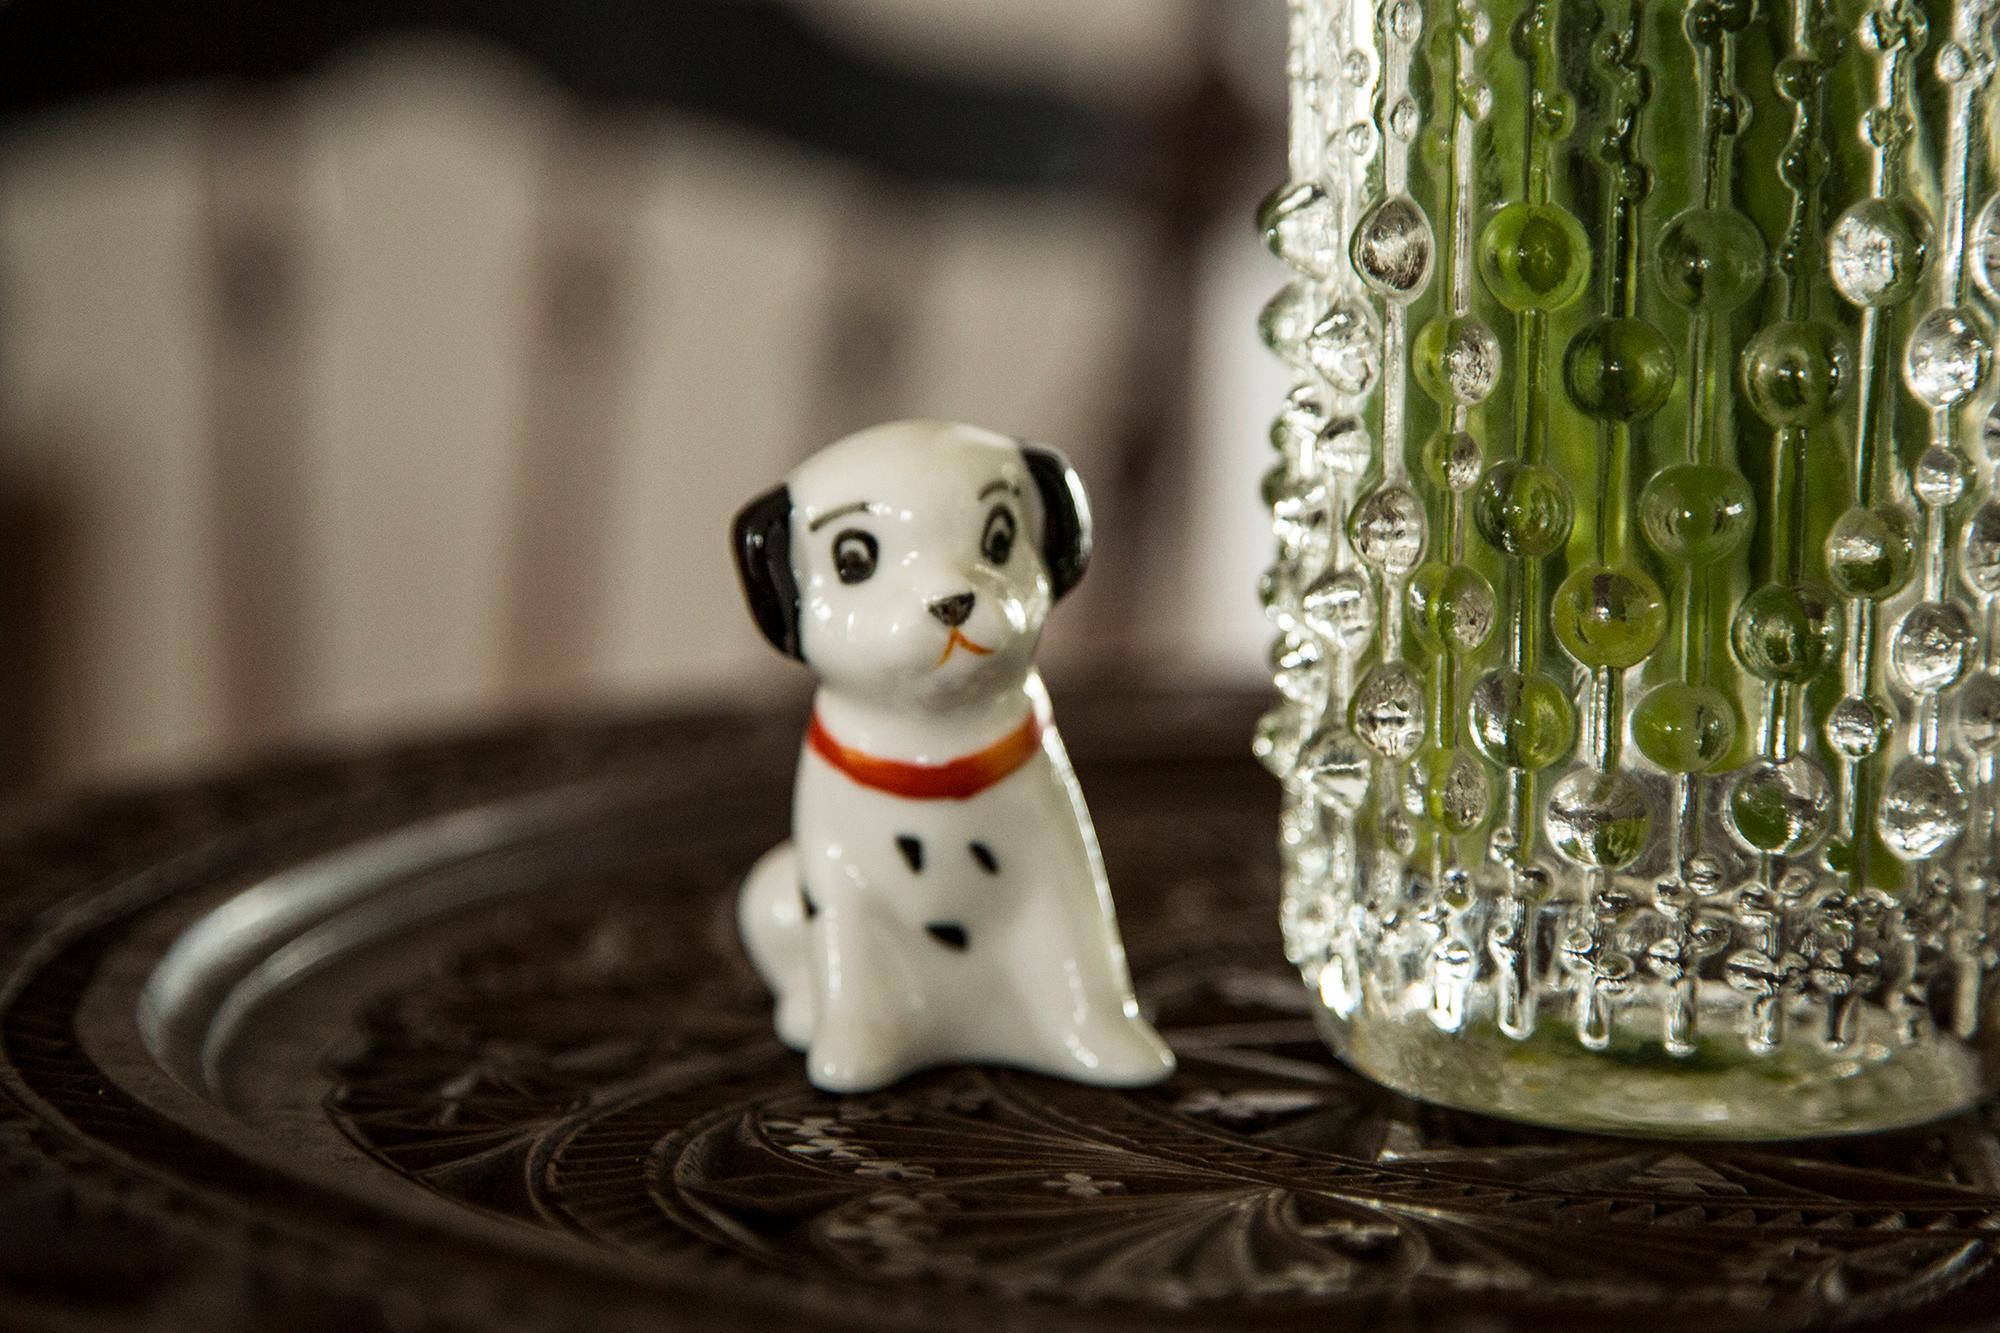 Painted ceramic, very good original vintage condition. No damages or cracks. Beautiful and unique decorative sculpture. Mini Dalmatian Dog Sculpture was produced in Italy. Only one dog available.